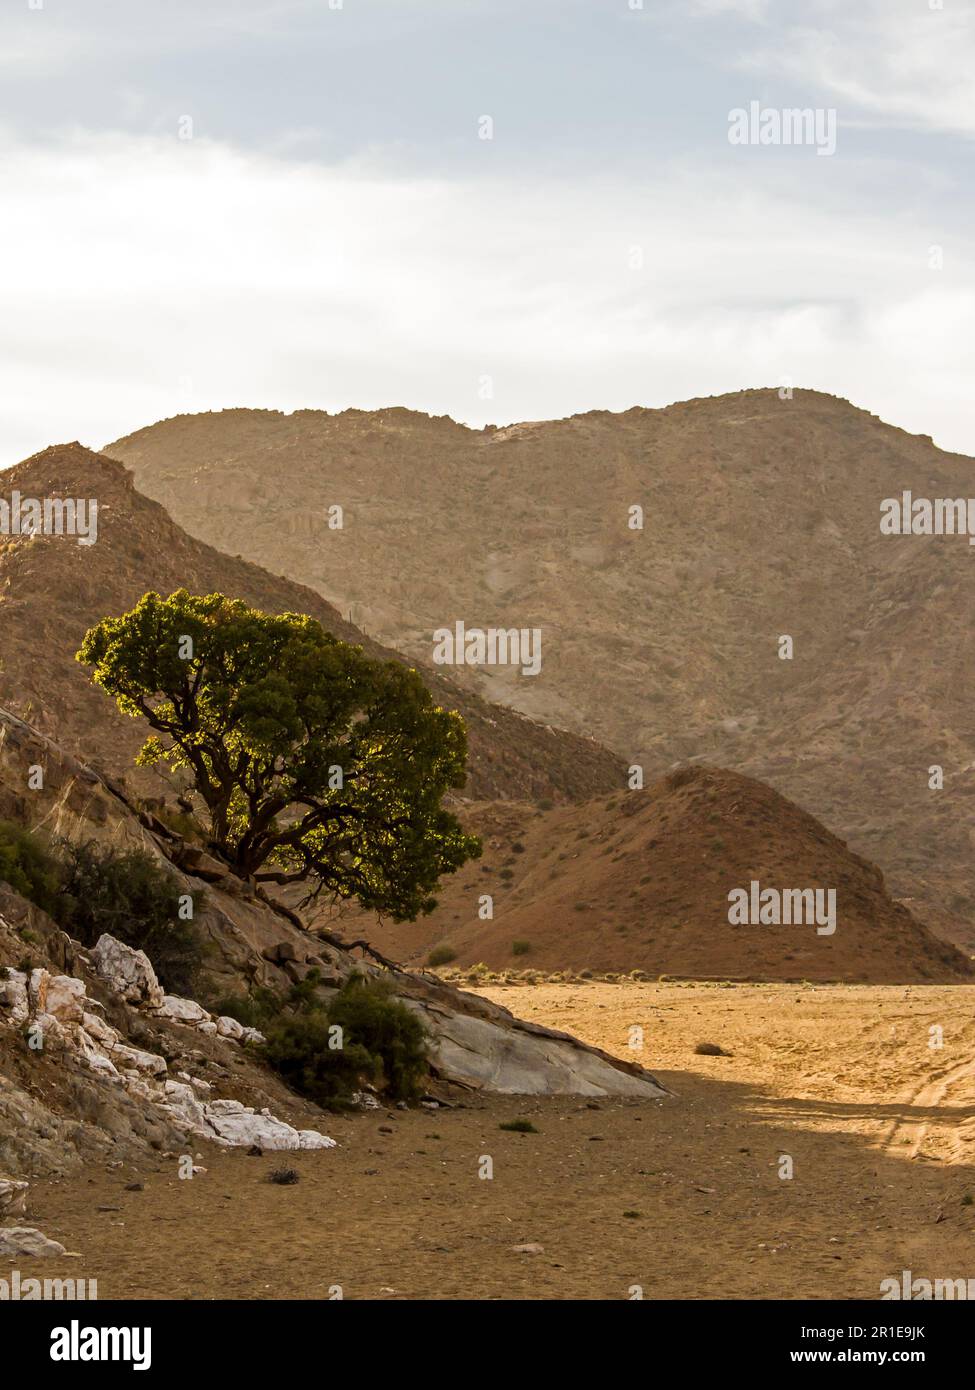 Enchanted view of a single tree in a desert mountain landscape Stock Photo